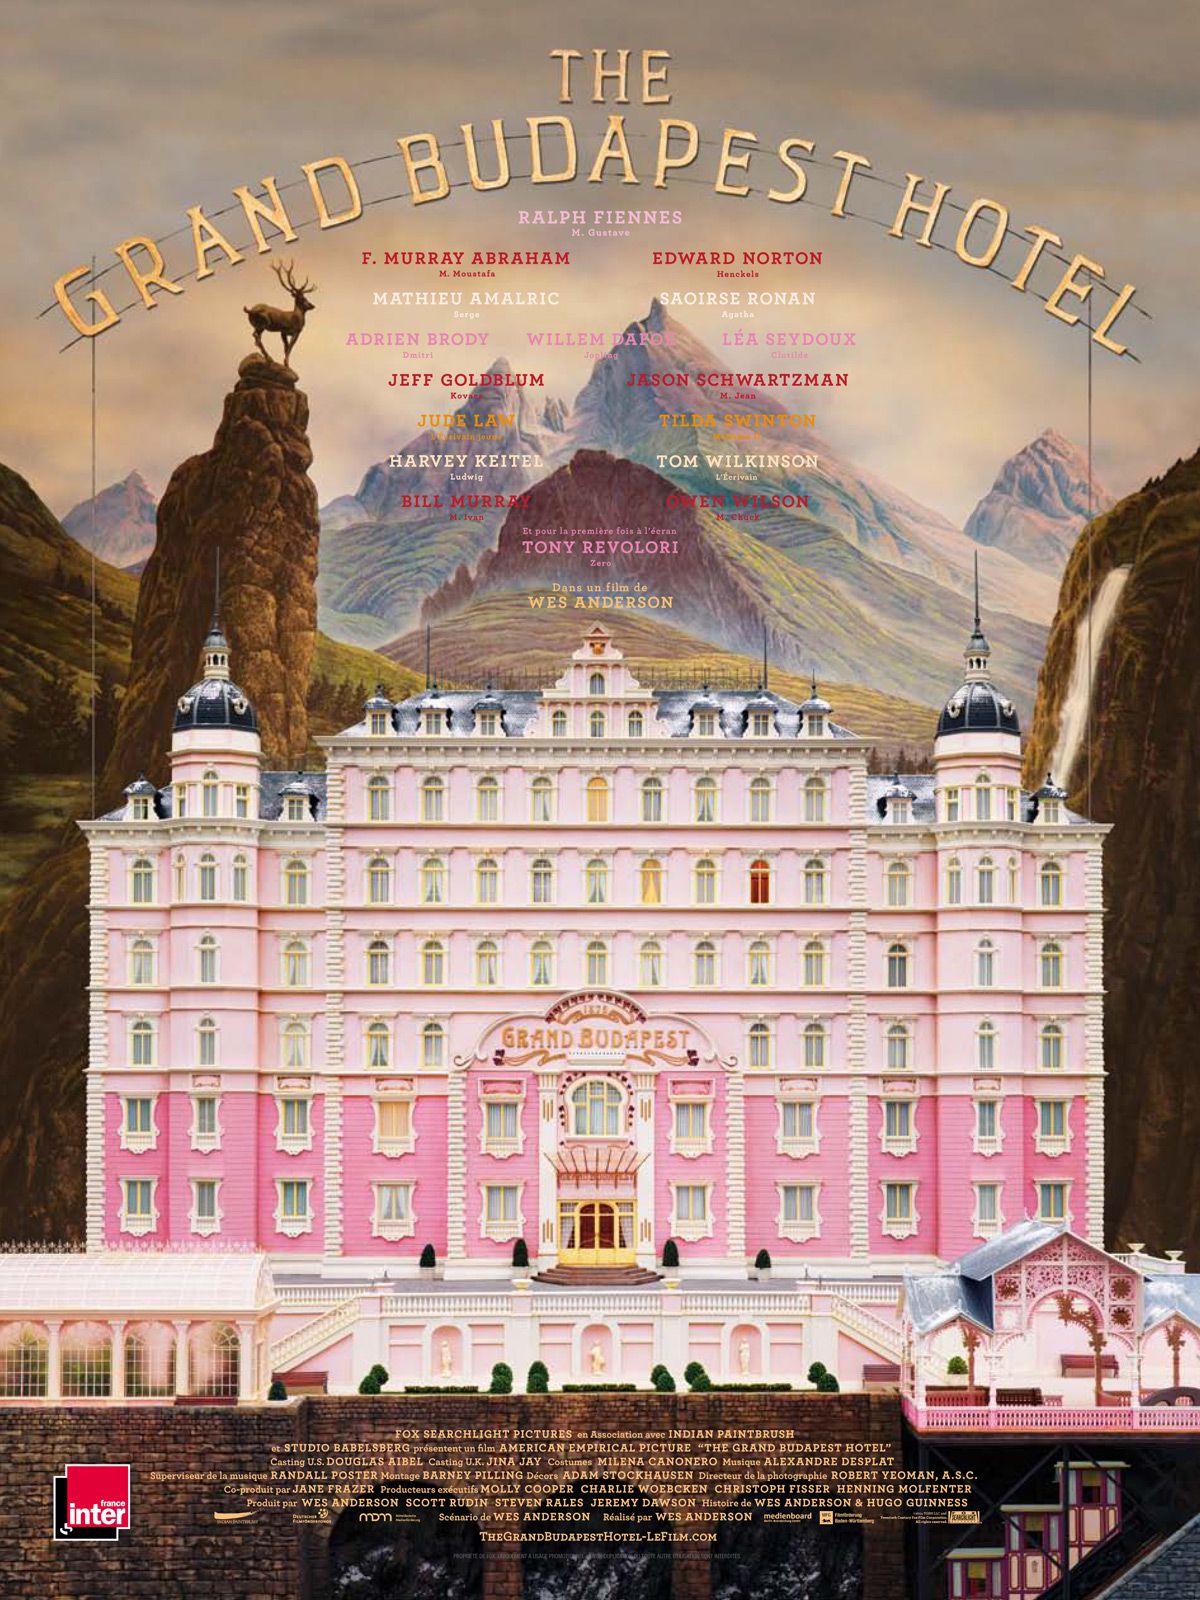 The Grand Budapest Hotel - Film (2014) streaming VF gratuit complet